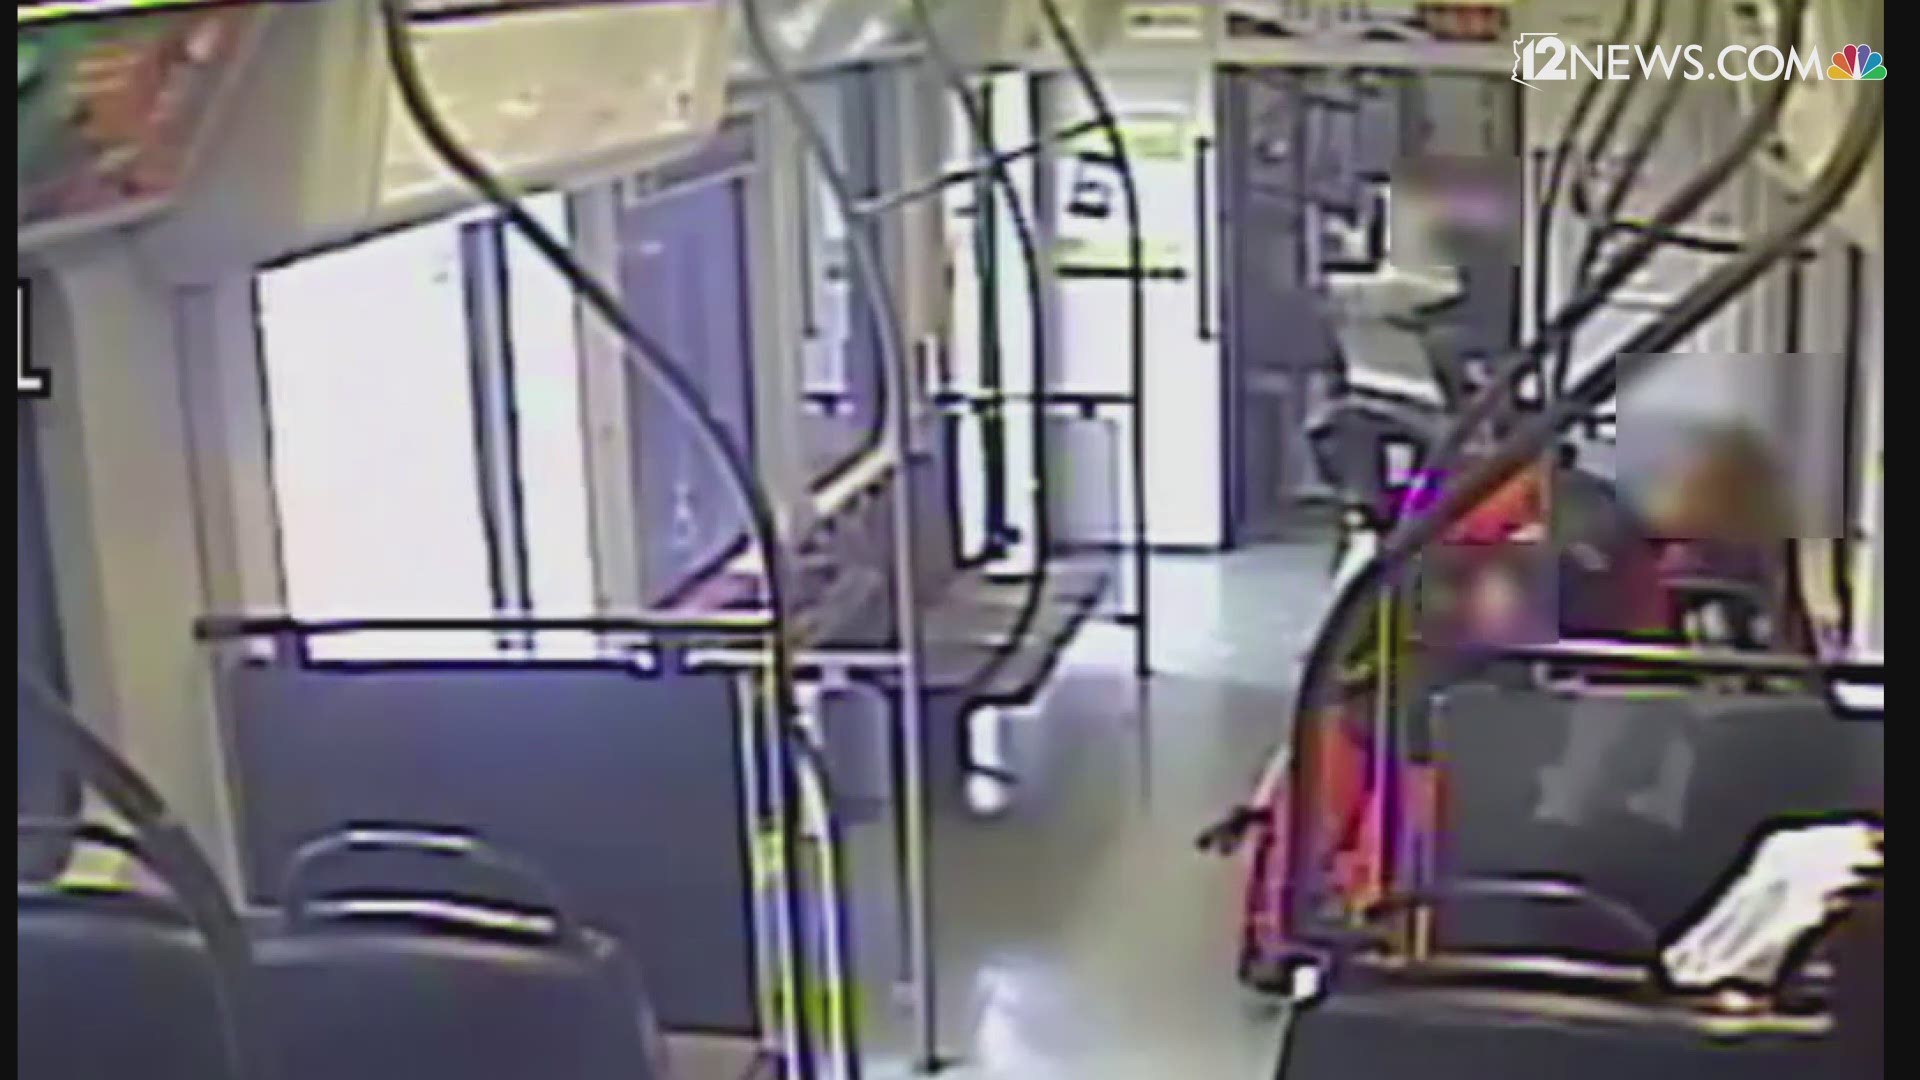 Police say a bystander stopped a man from getting away with a woman's wheelchair after he pushed her out of it on a Phoenix light rail car.